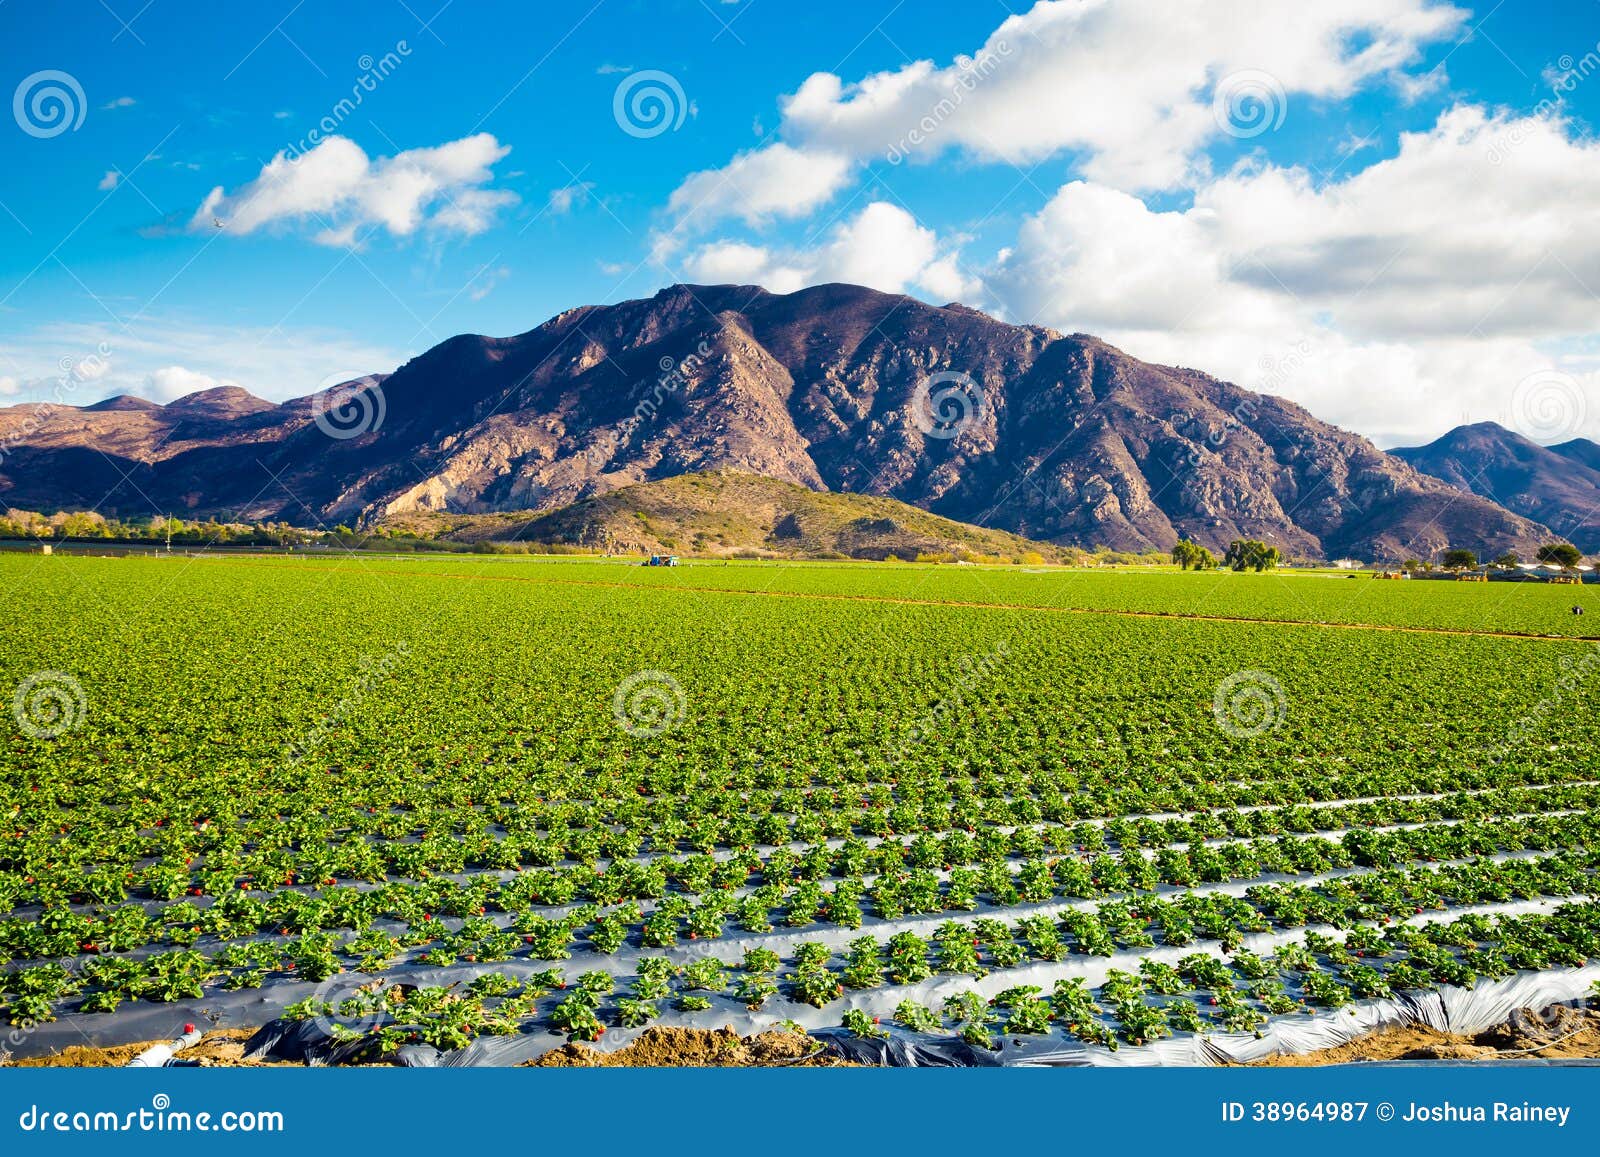 strawberry field and mountains